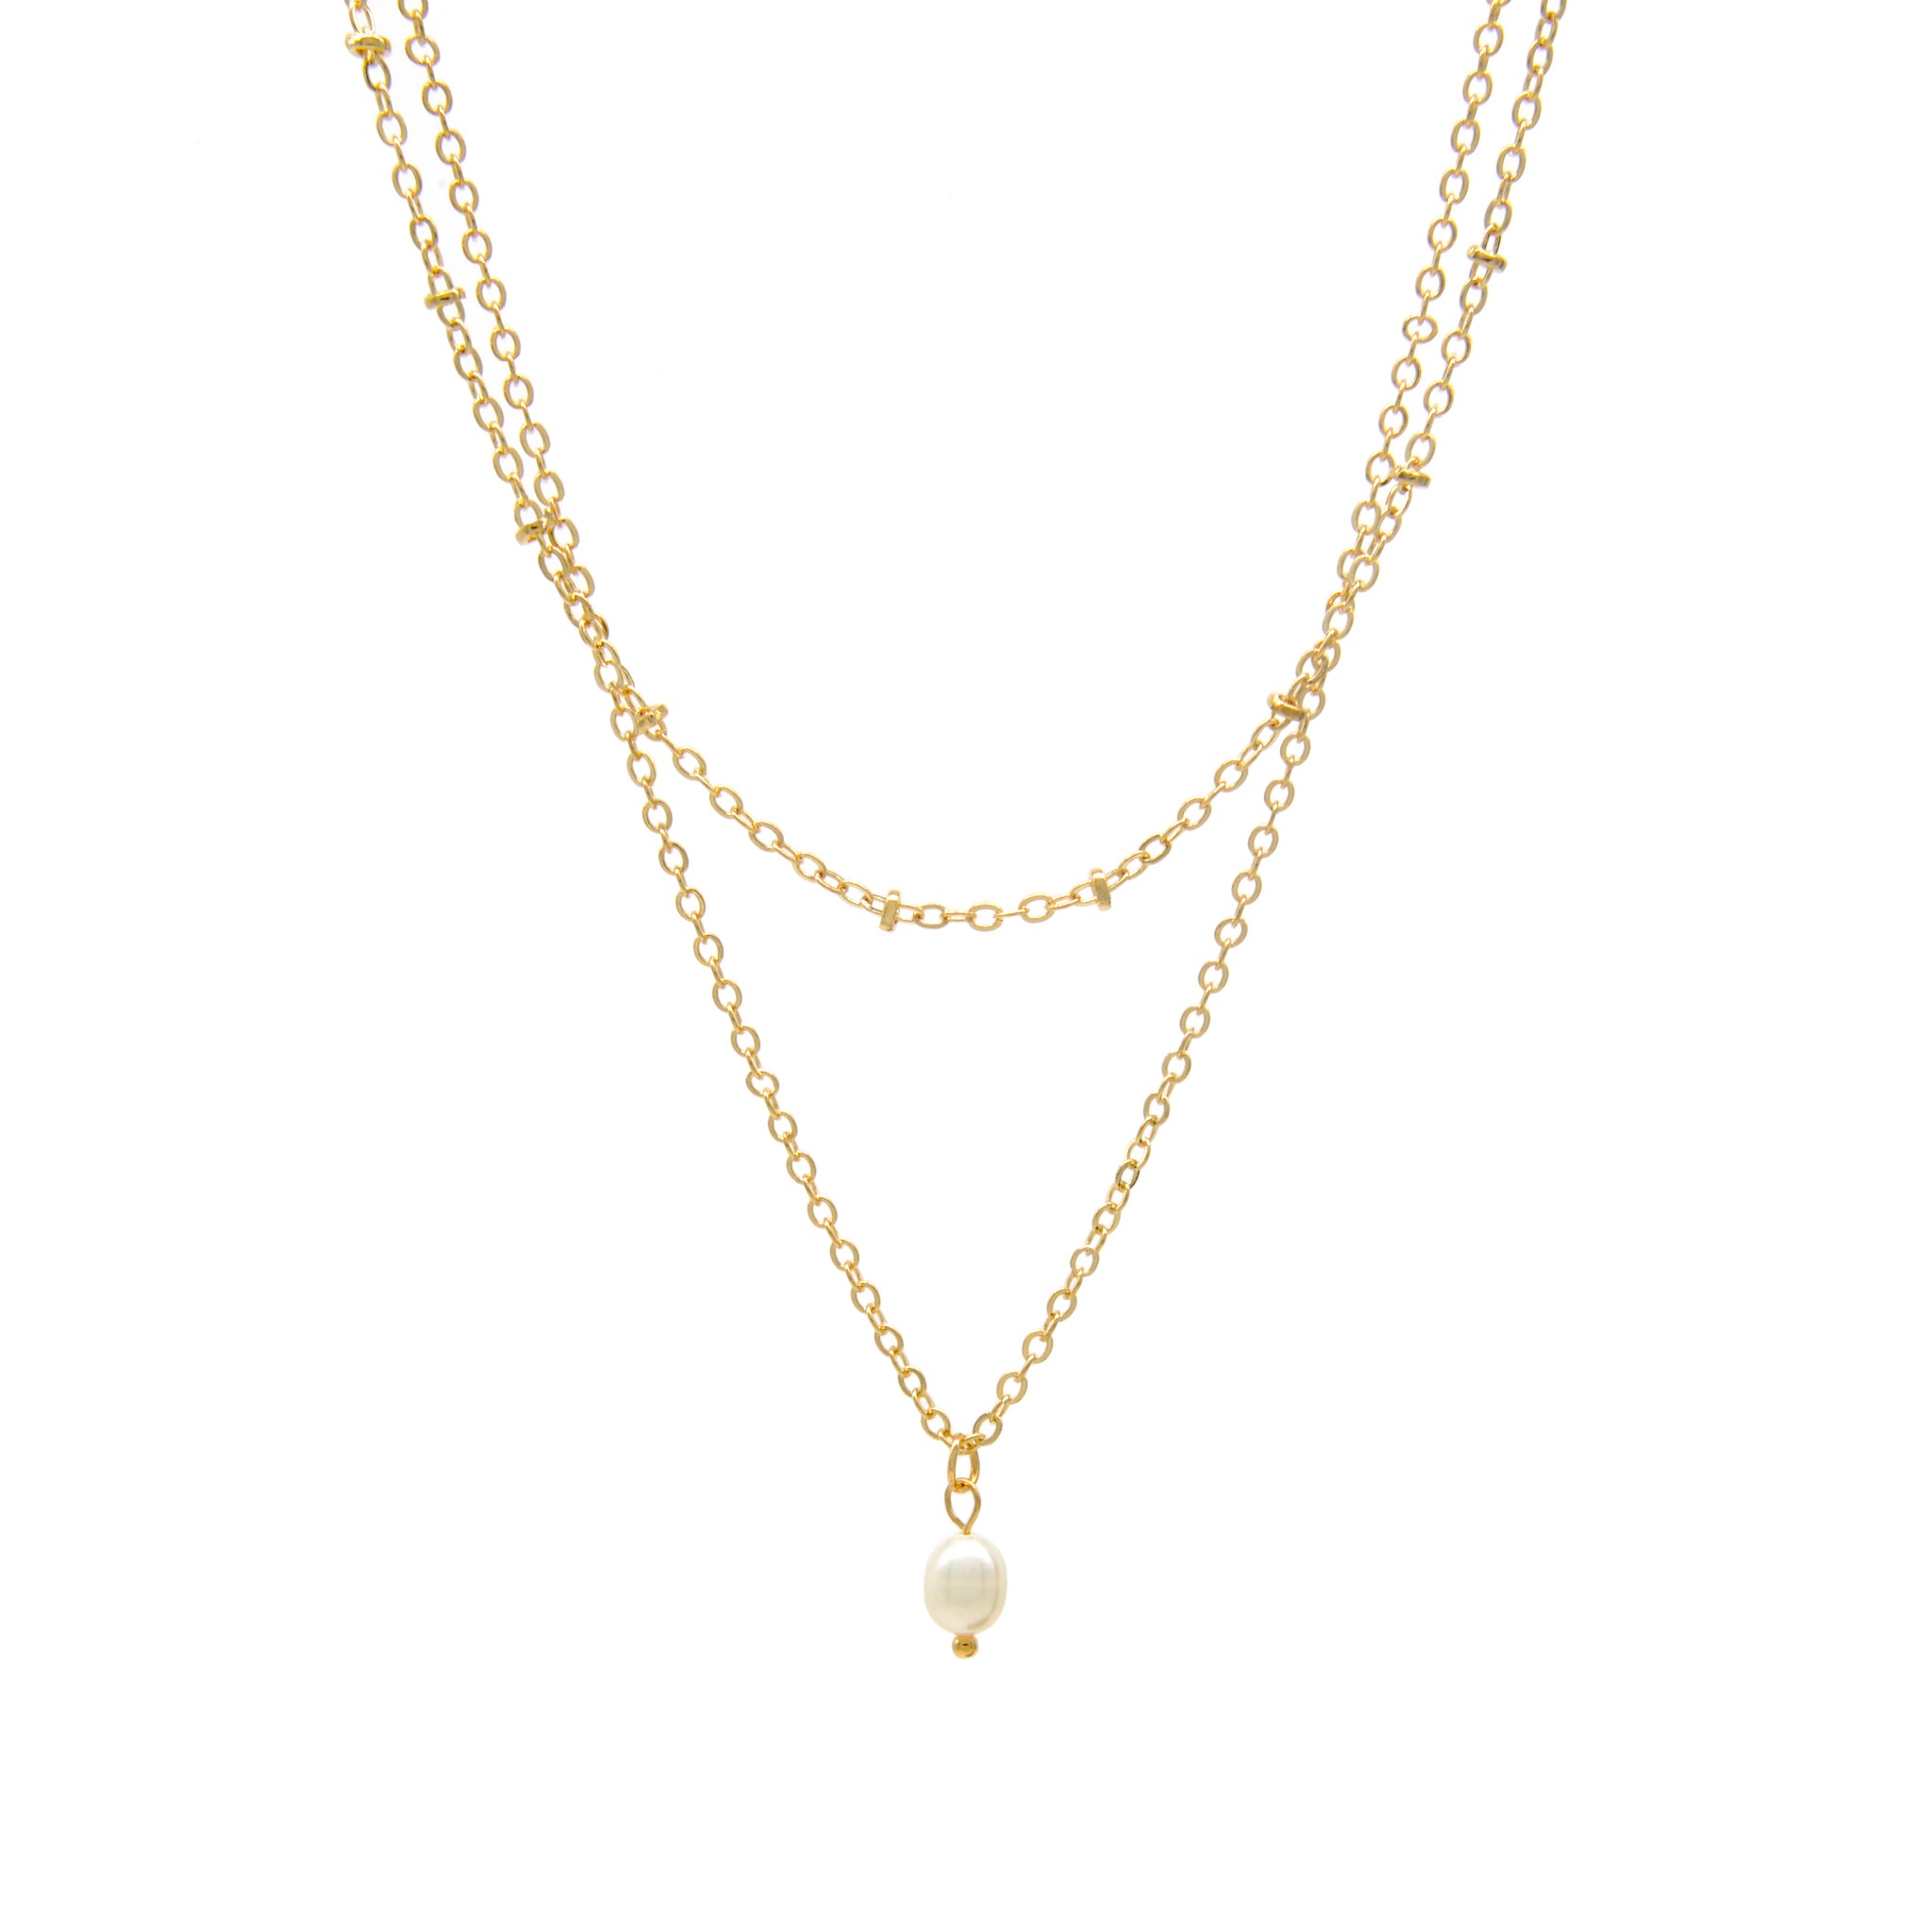 Nuance Double Chain Necklace with Pearl